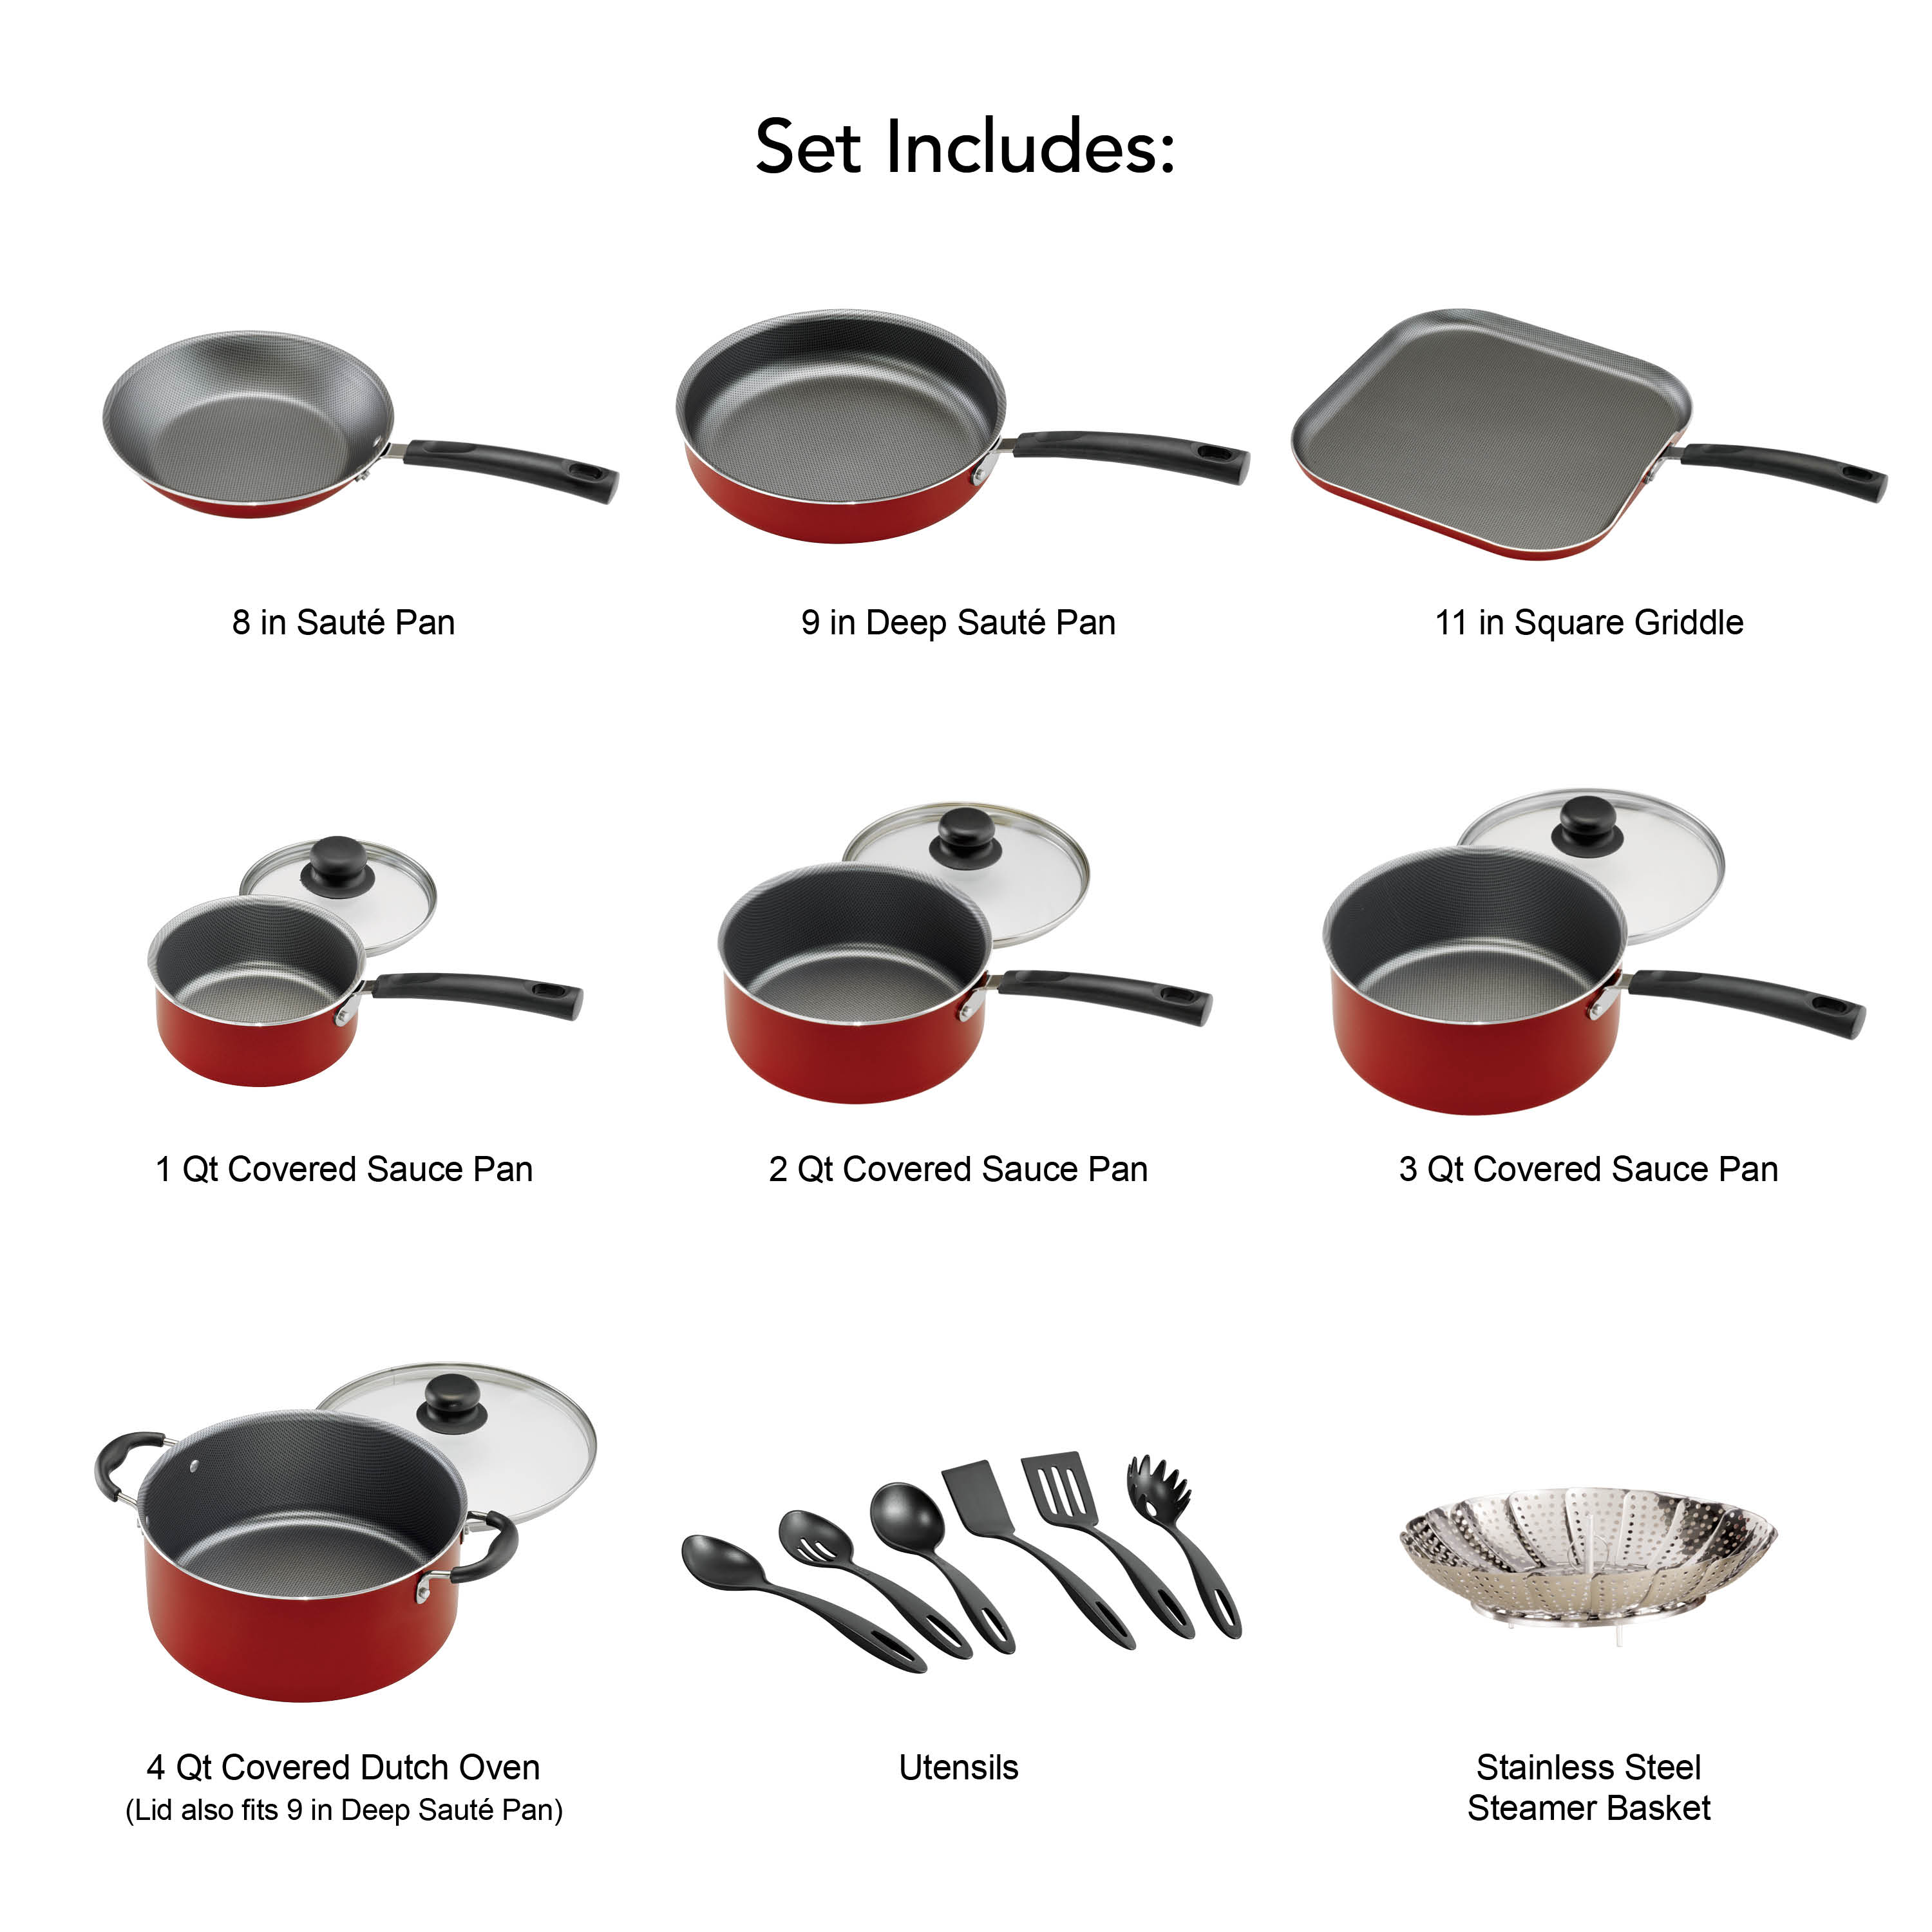 Tramontina Primaware 18 Piece Non-stick Cookware Set, Red - image 5 of 27